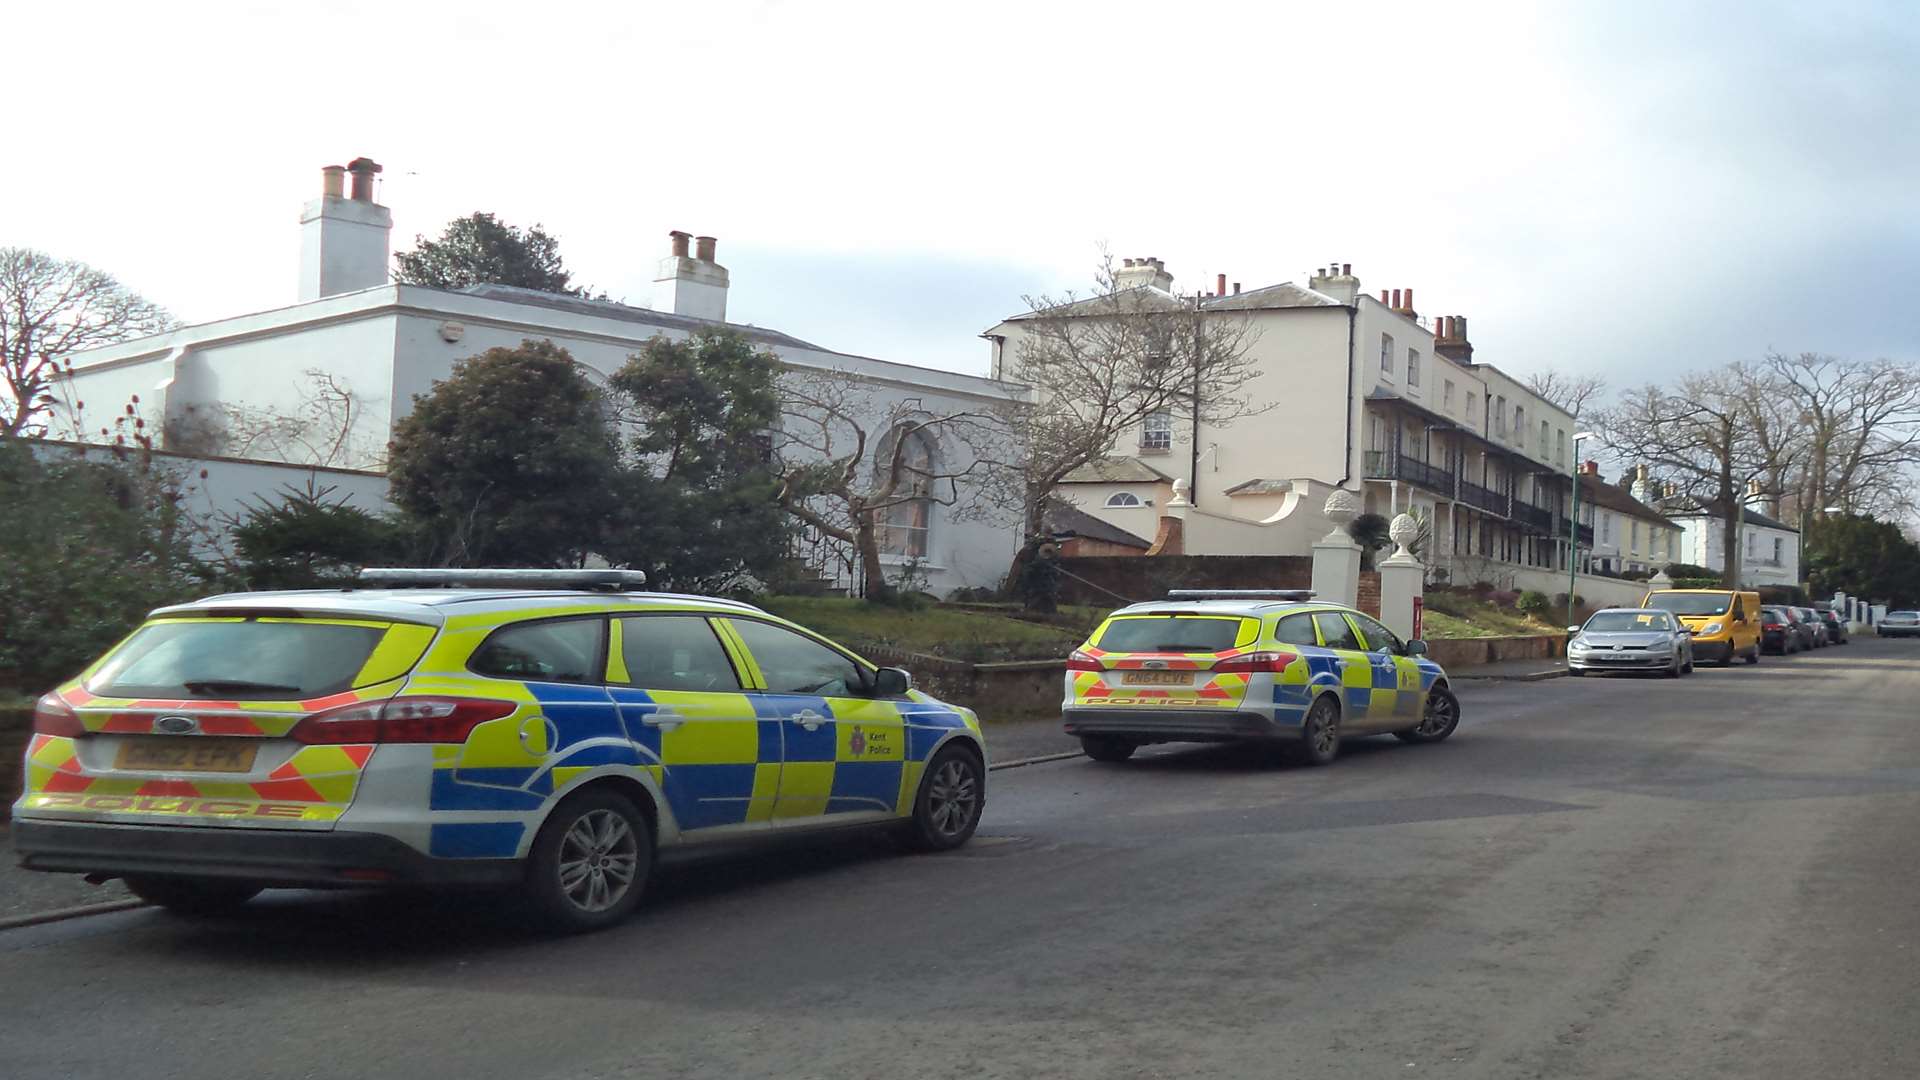 The man is believe to have been badly injured after the three-storey fall